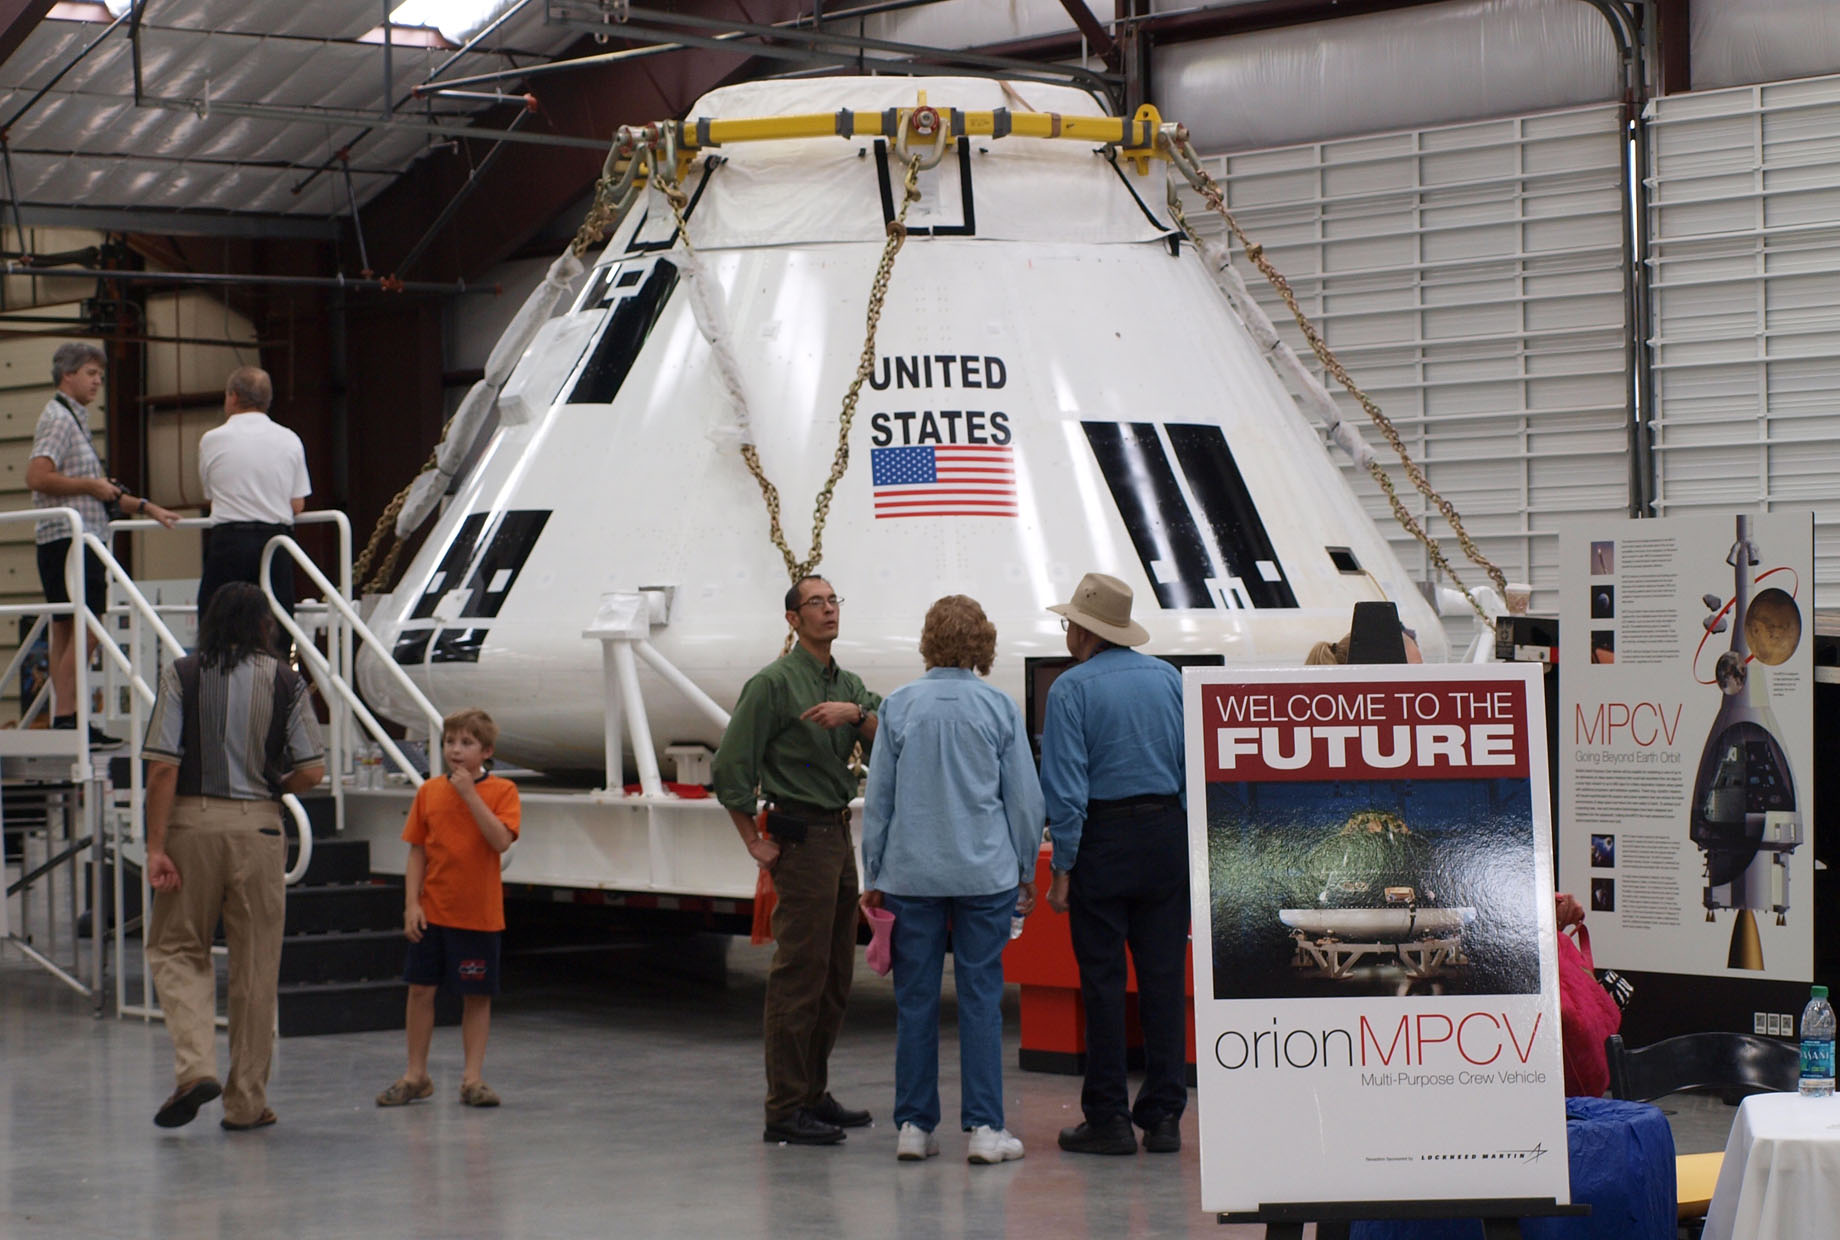 The NASA Orion traveling exhibit at Pima Air & Space Museum during June 2011. Photo by John Bezosky Jr.